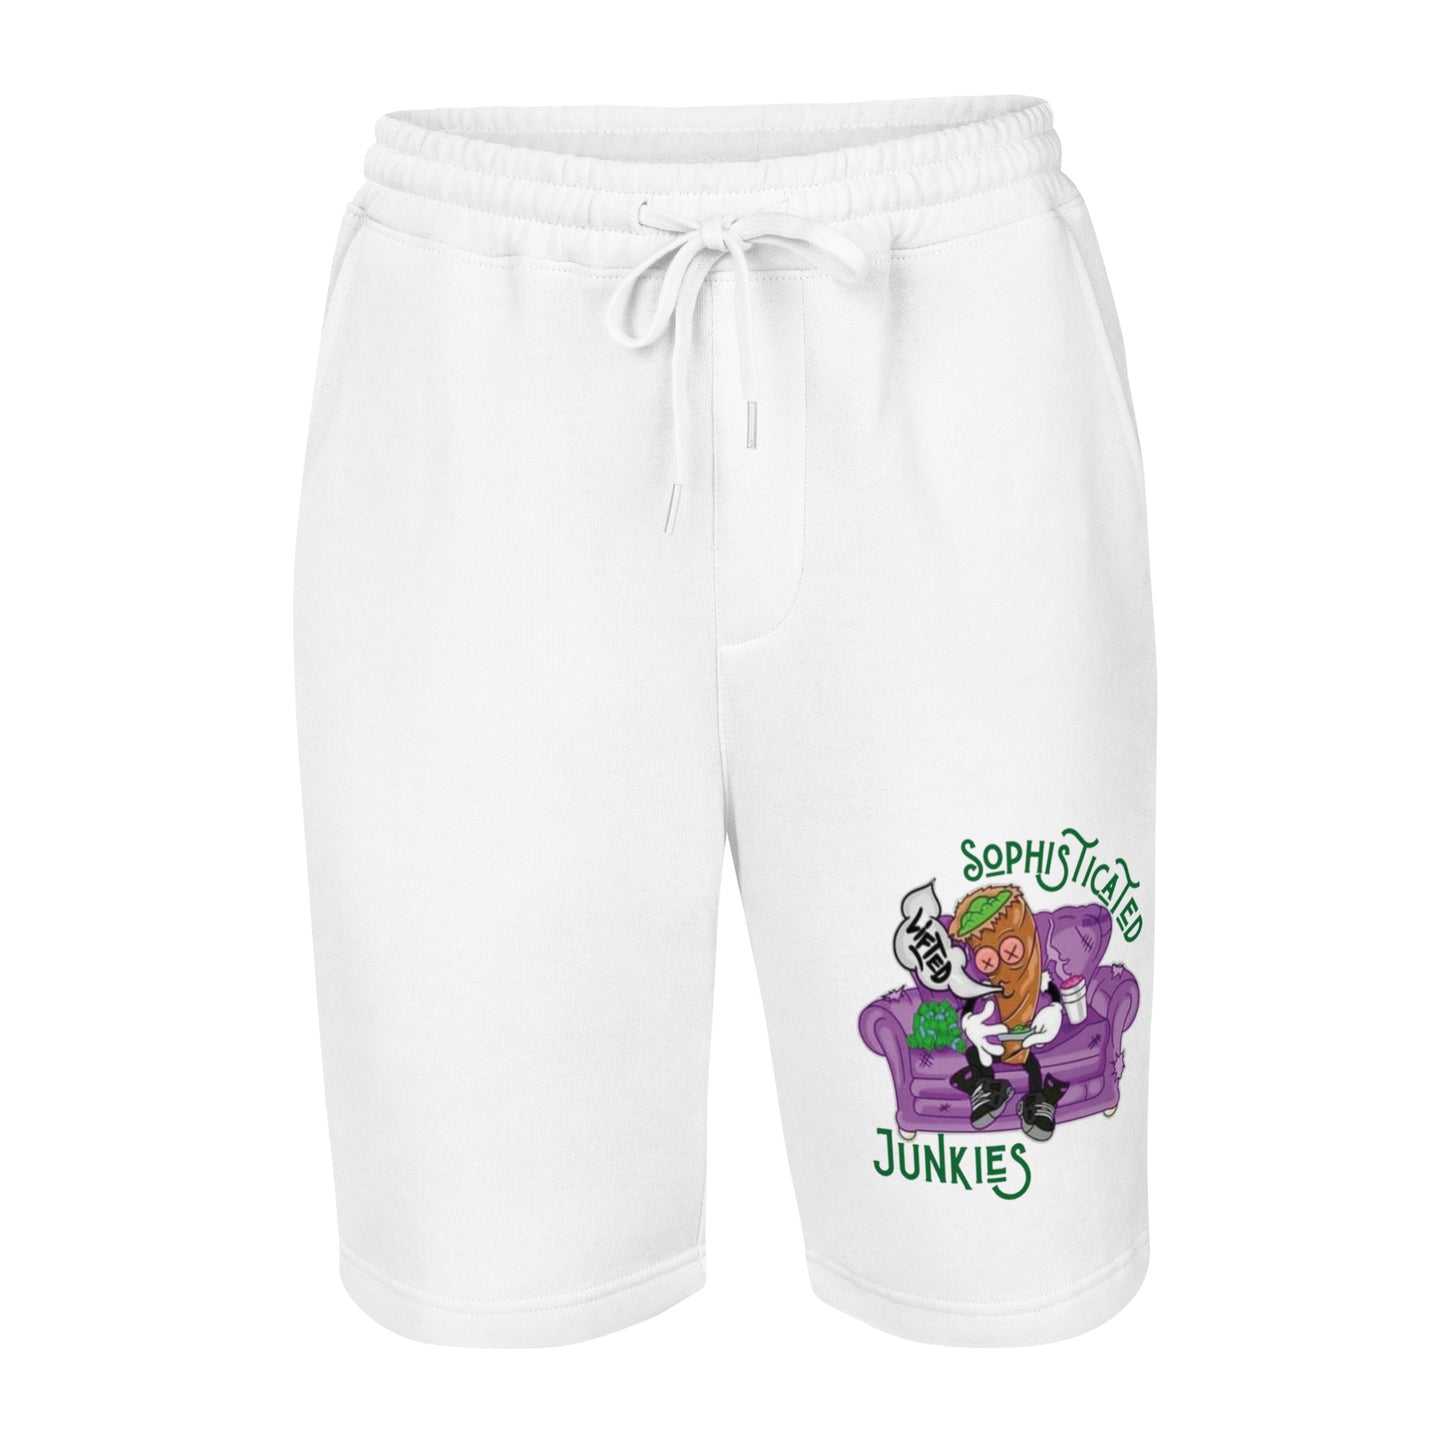 Sophisticated Junkies (Lifted) fleece shorts